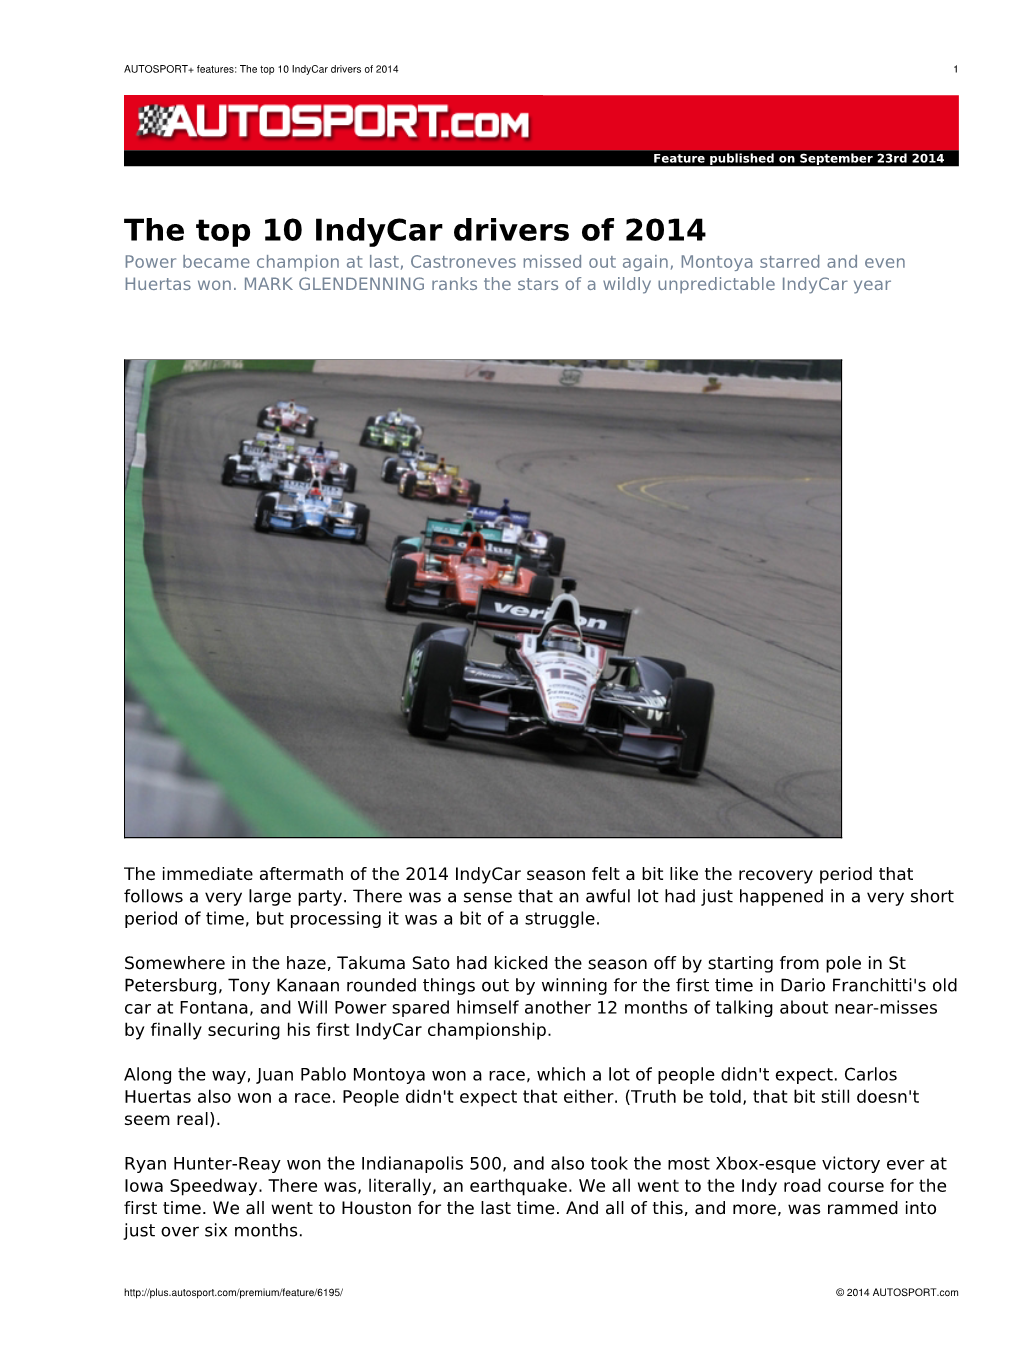 The Top 10 Indycar Drivers of 2014 1